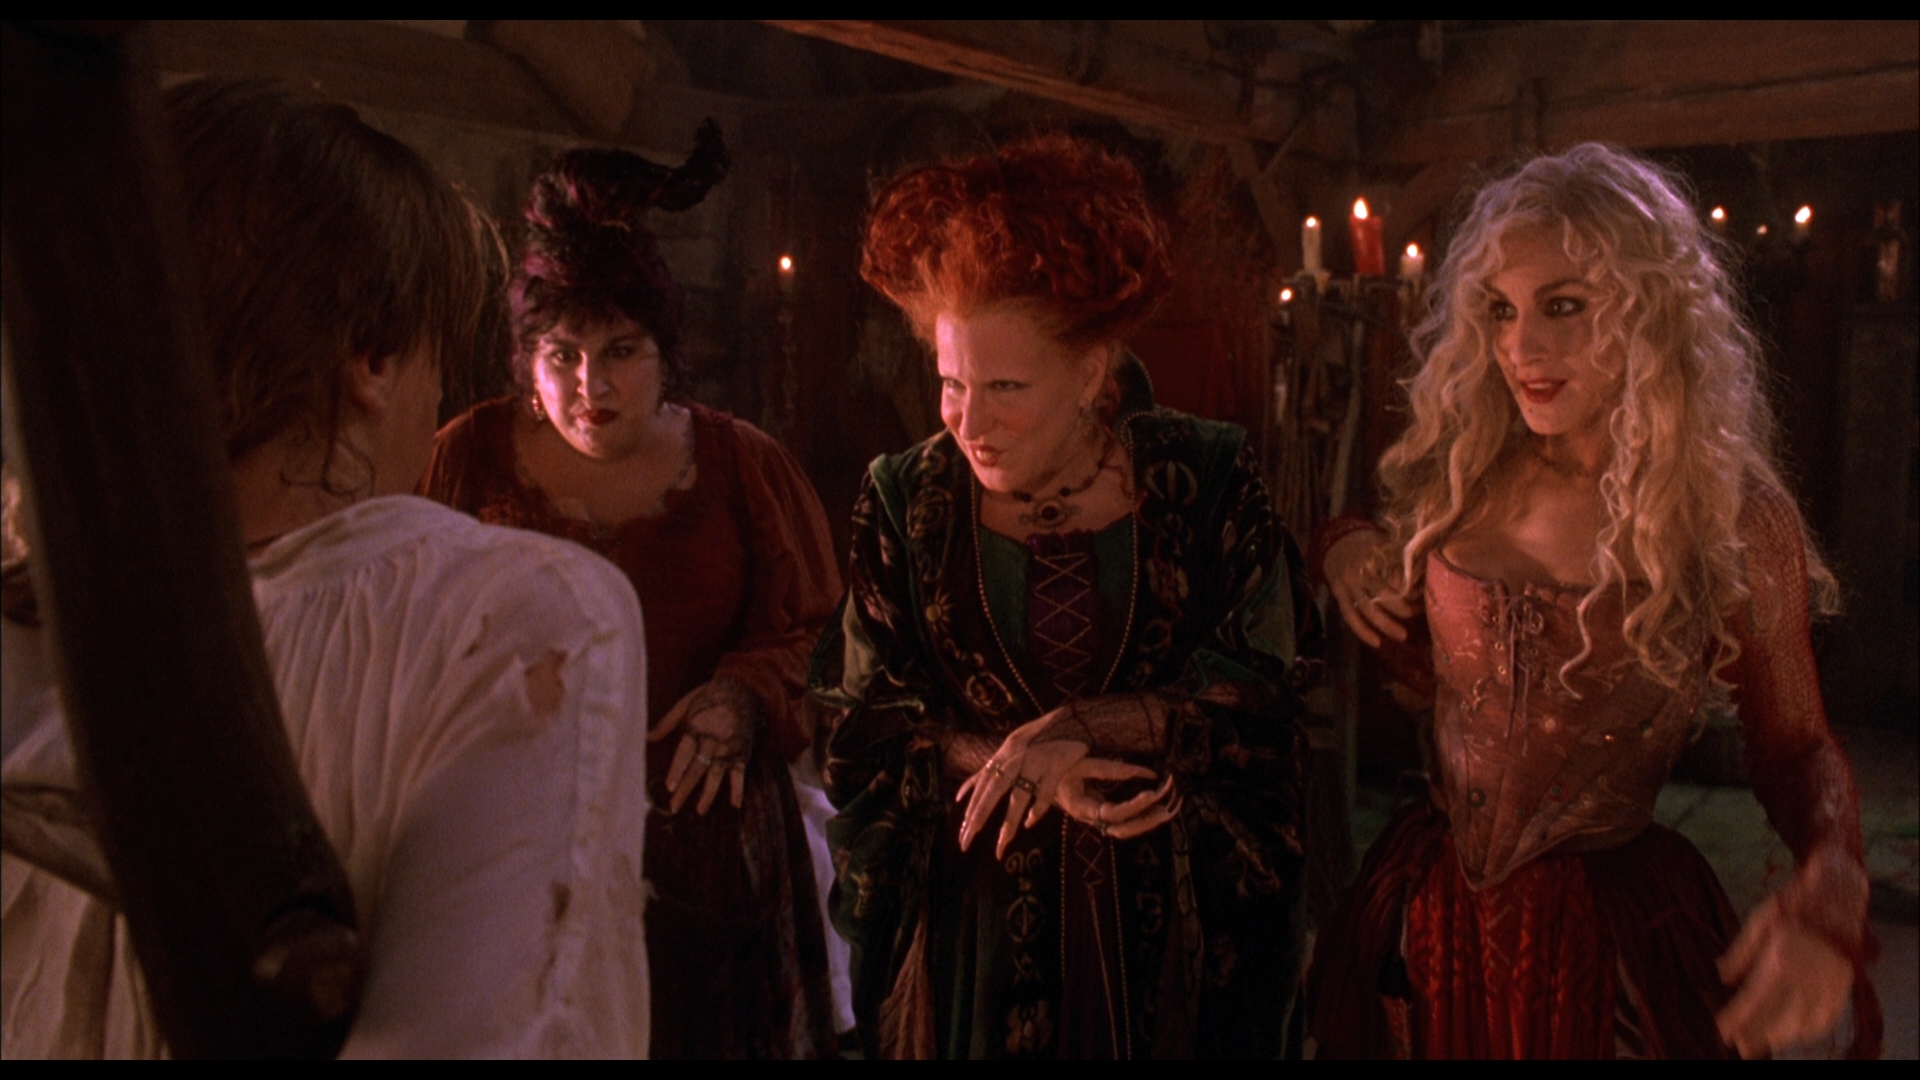 I thought she looked pretty good in Hocus Pocus as the young witch. 